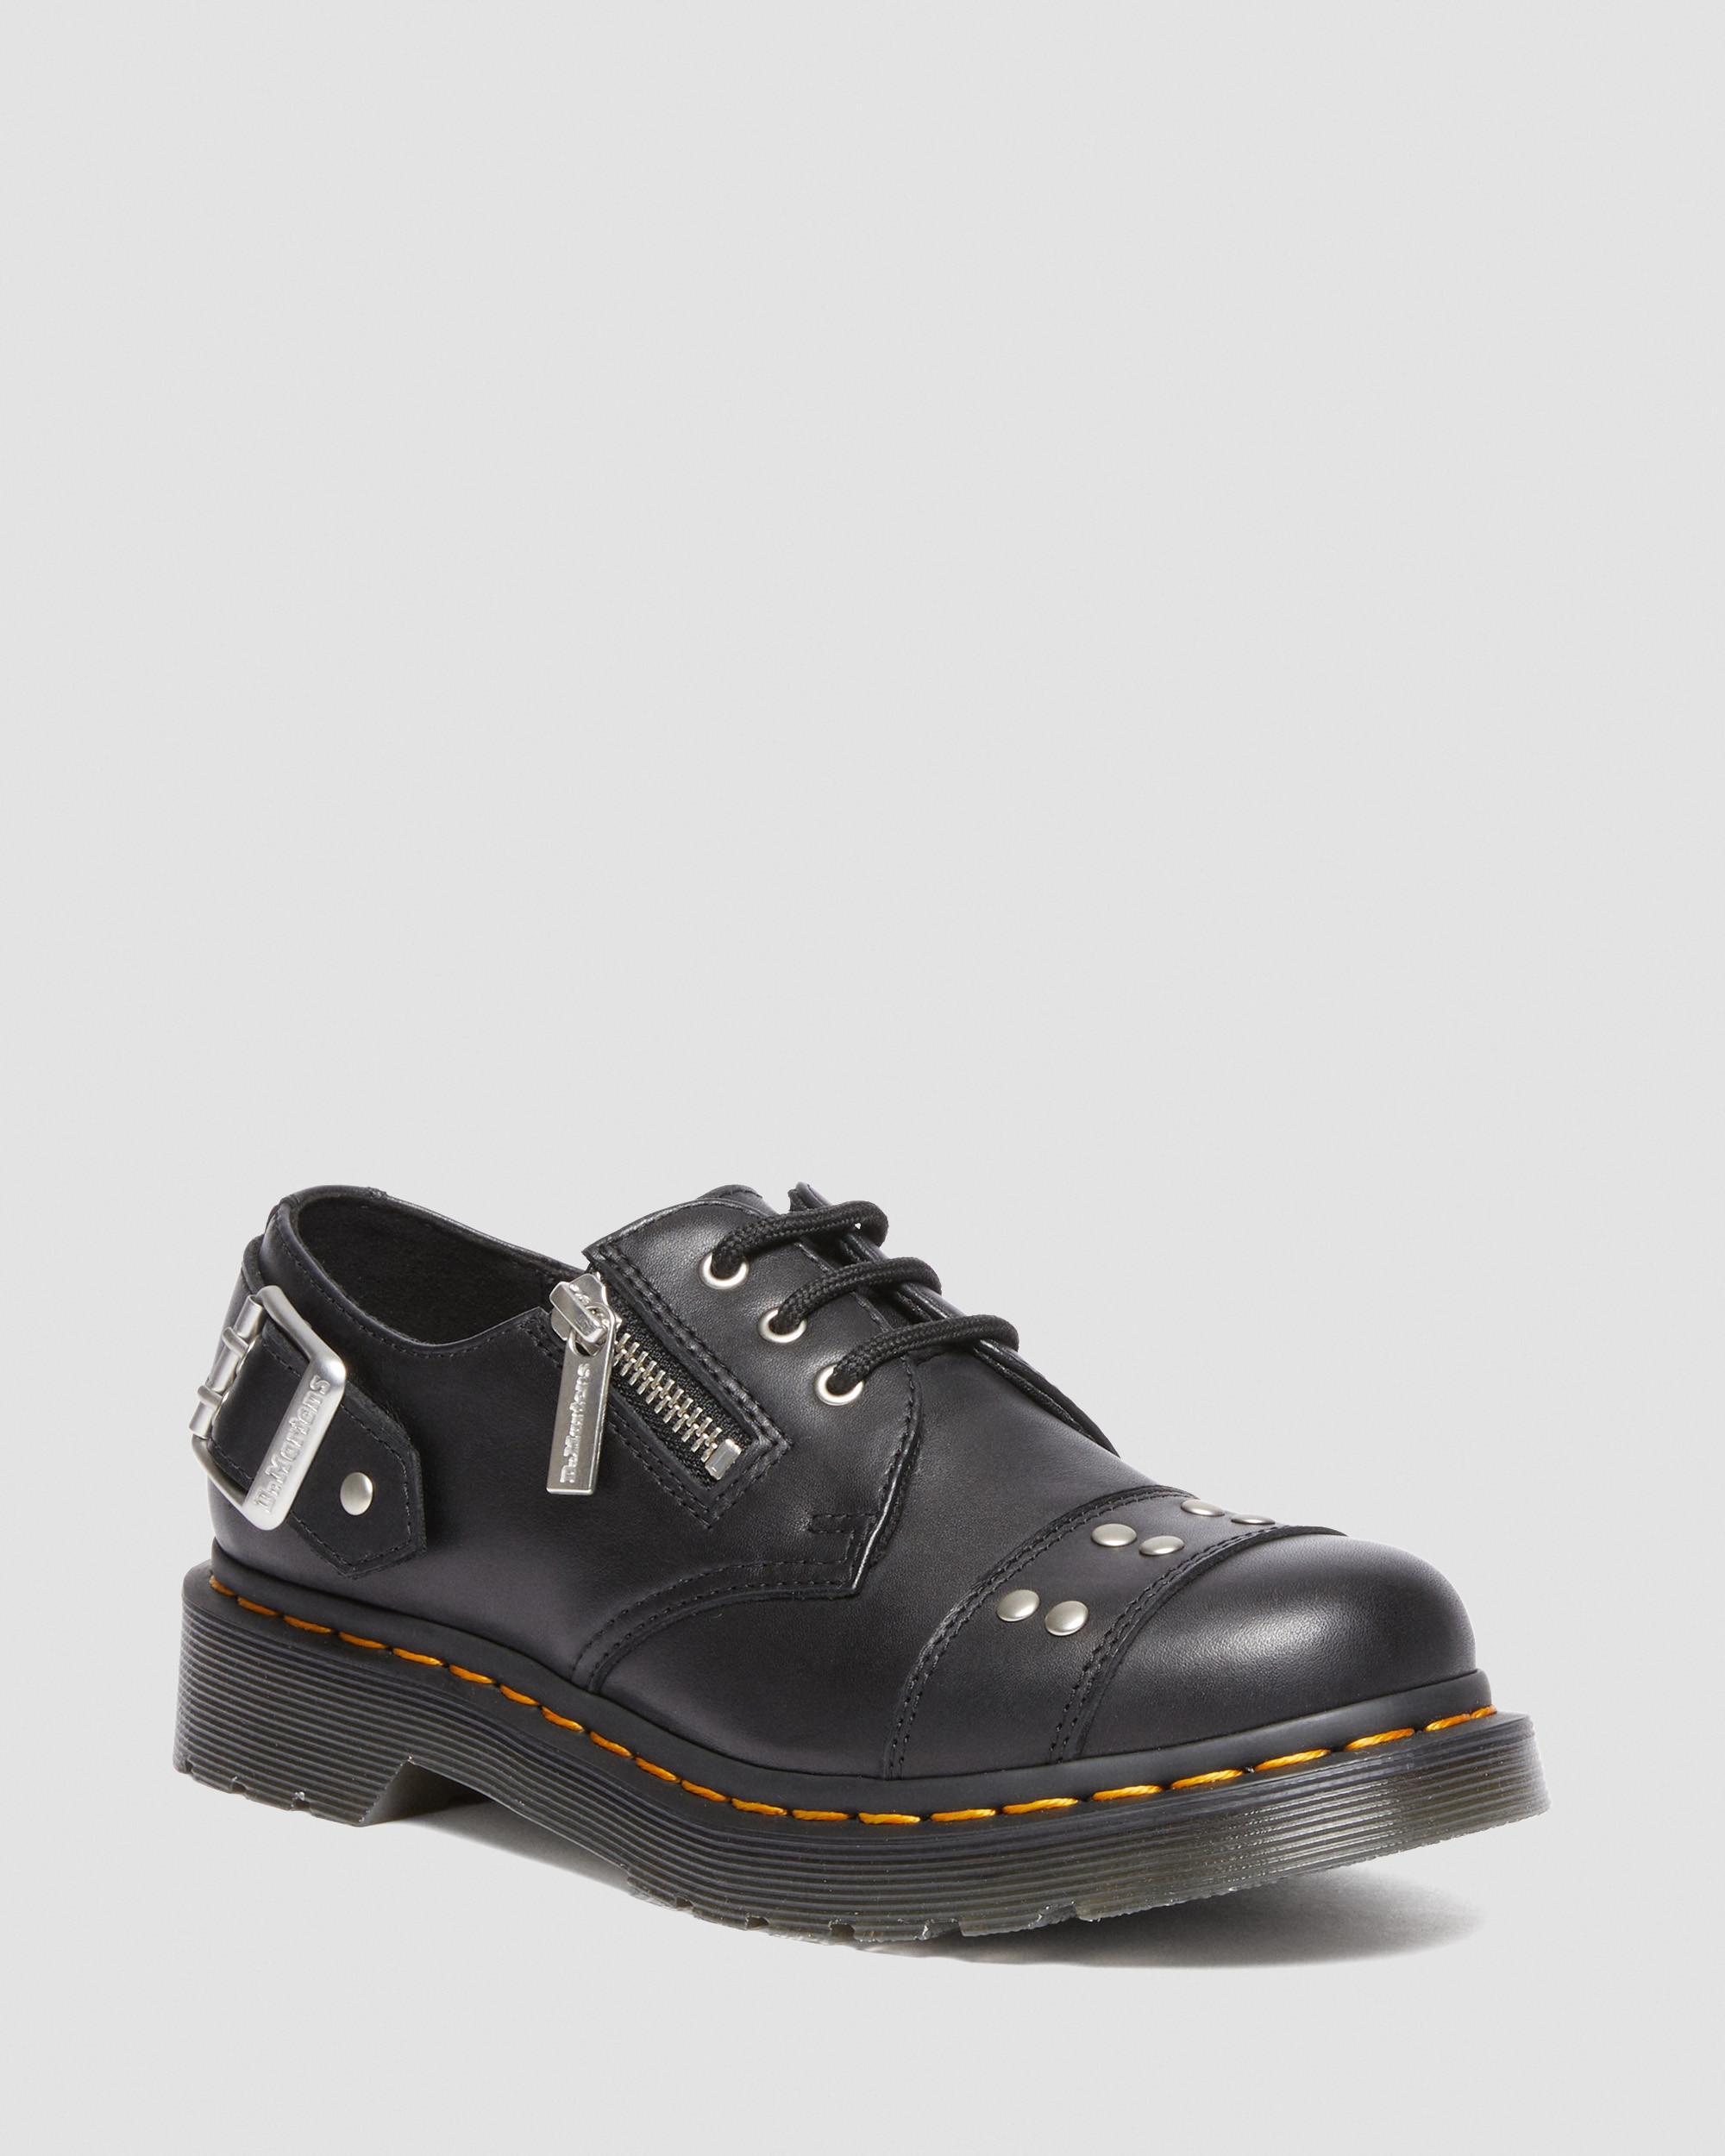 Dr. Martens 1461 Women's Hardware Nappa Leather Oxford Shoes in Black ...